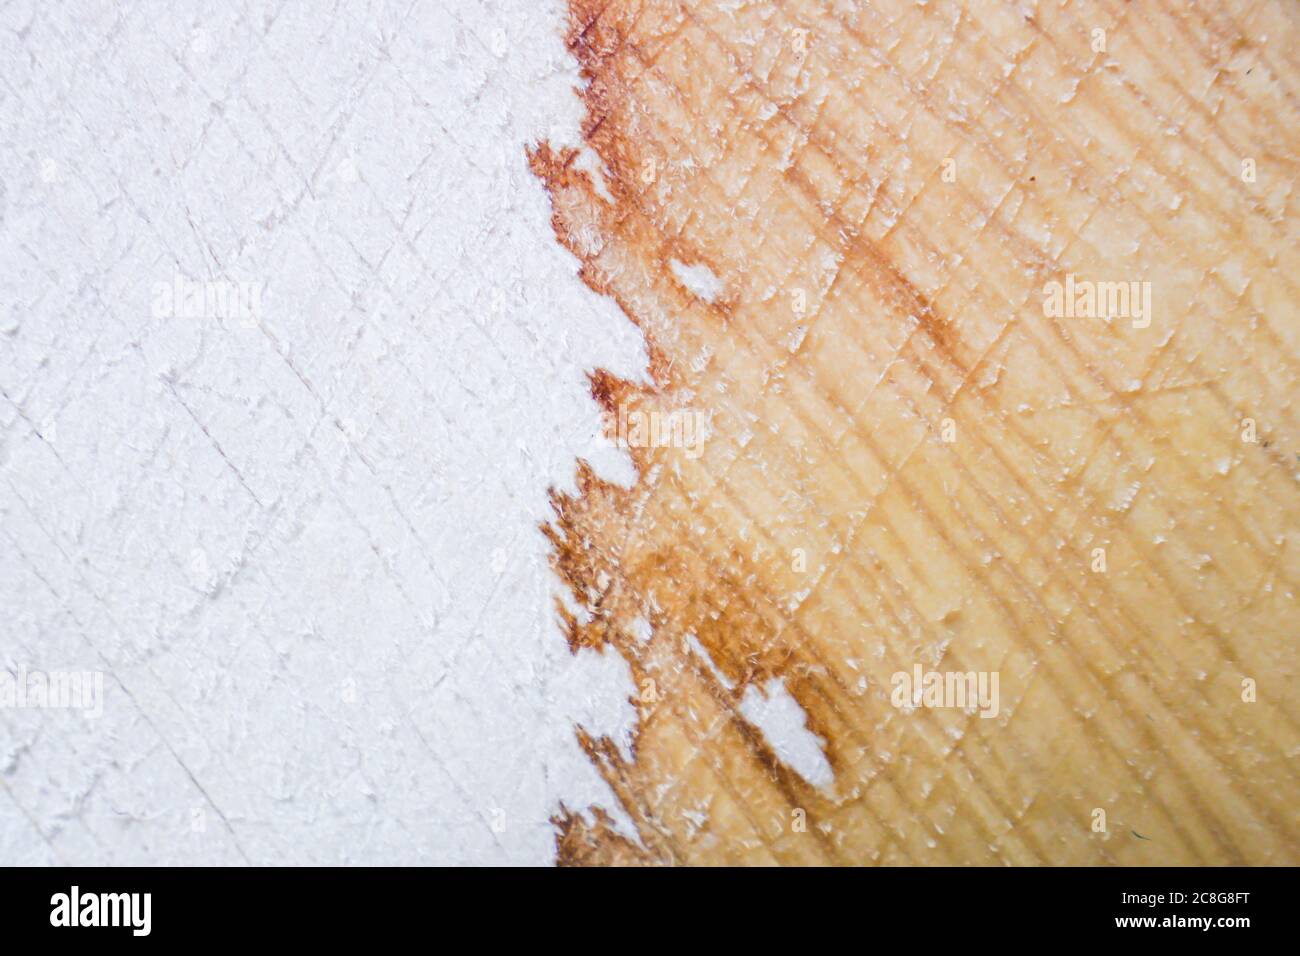 Brown stain spill on white surfacem abstract. Extreme close up. Stock Photo